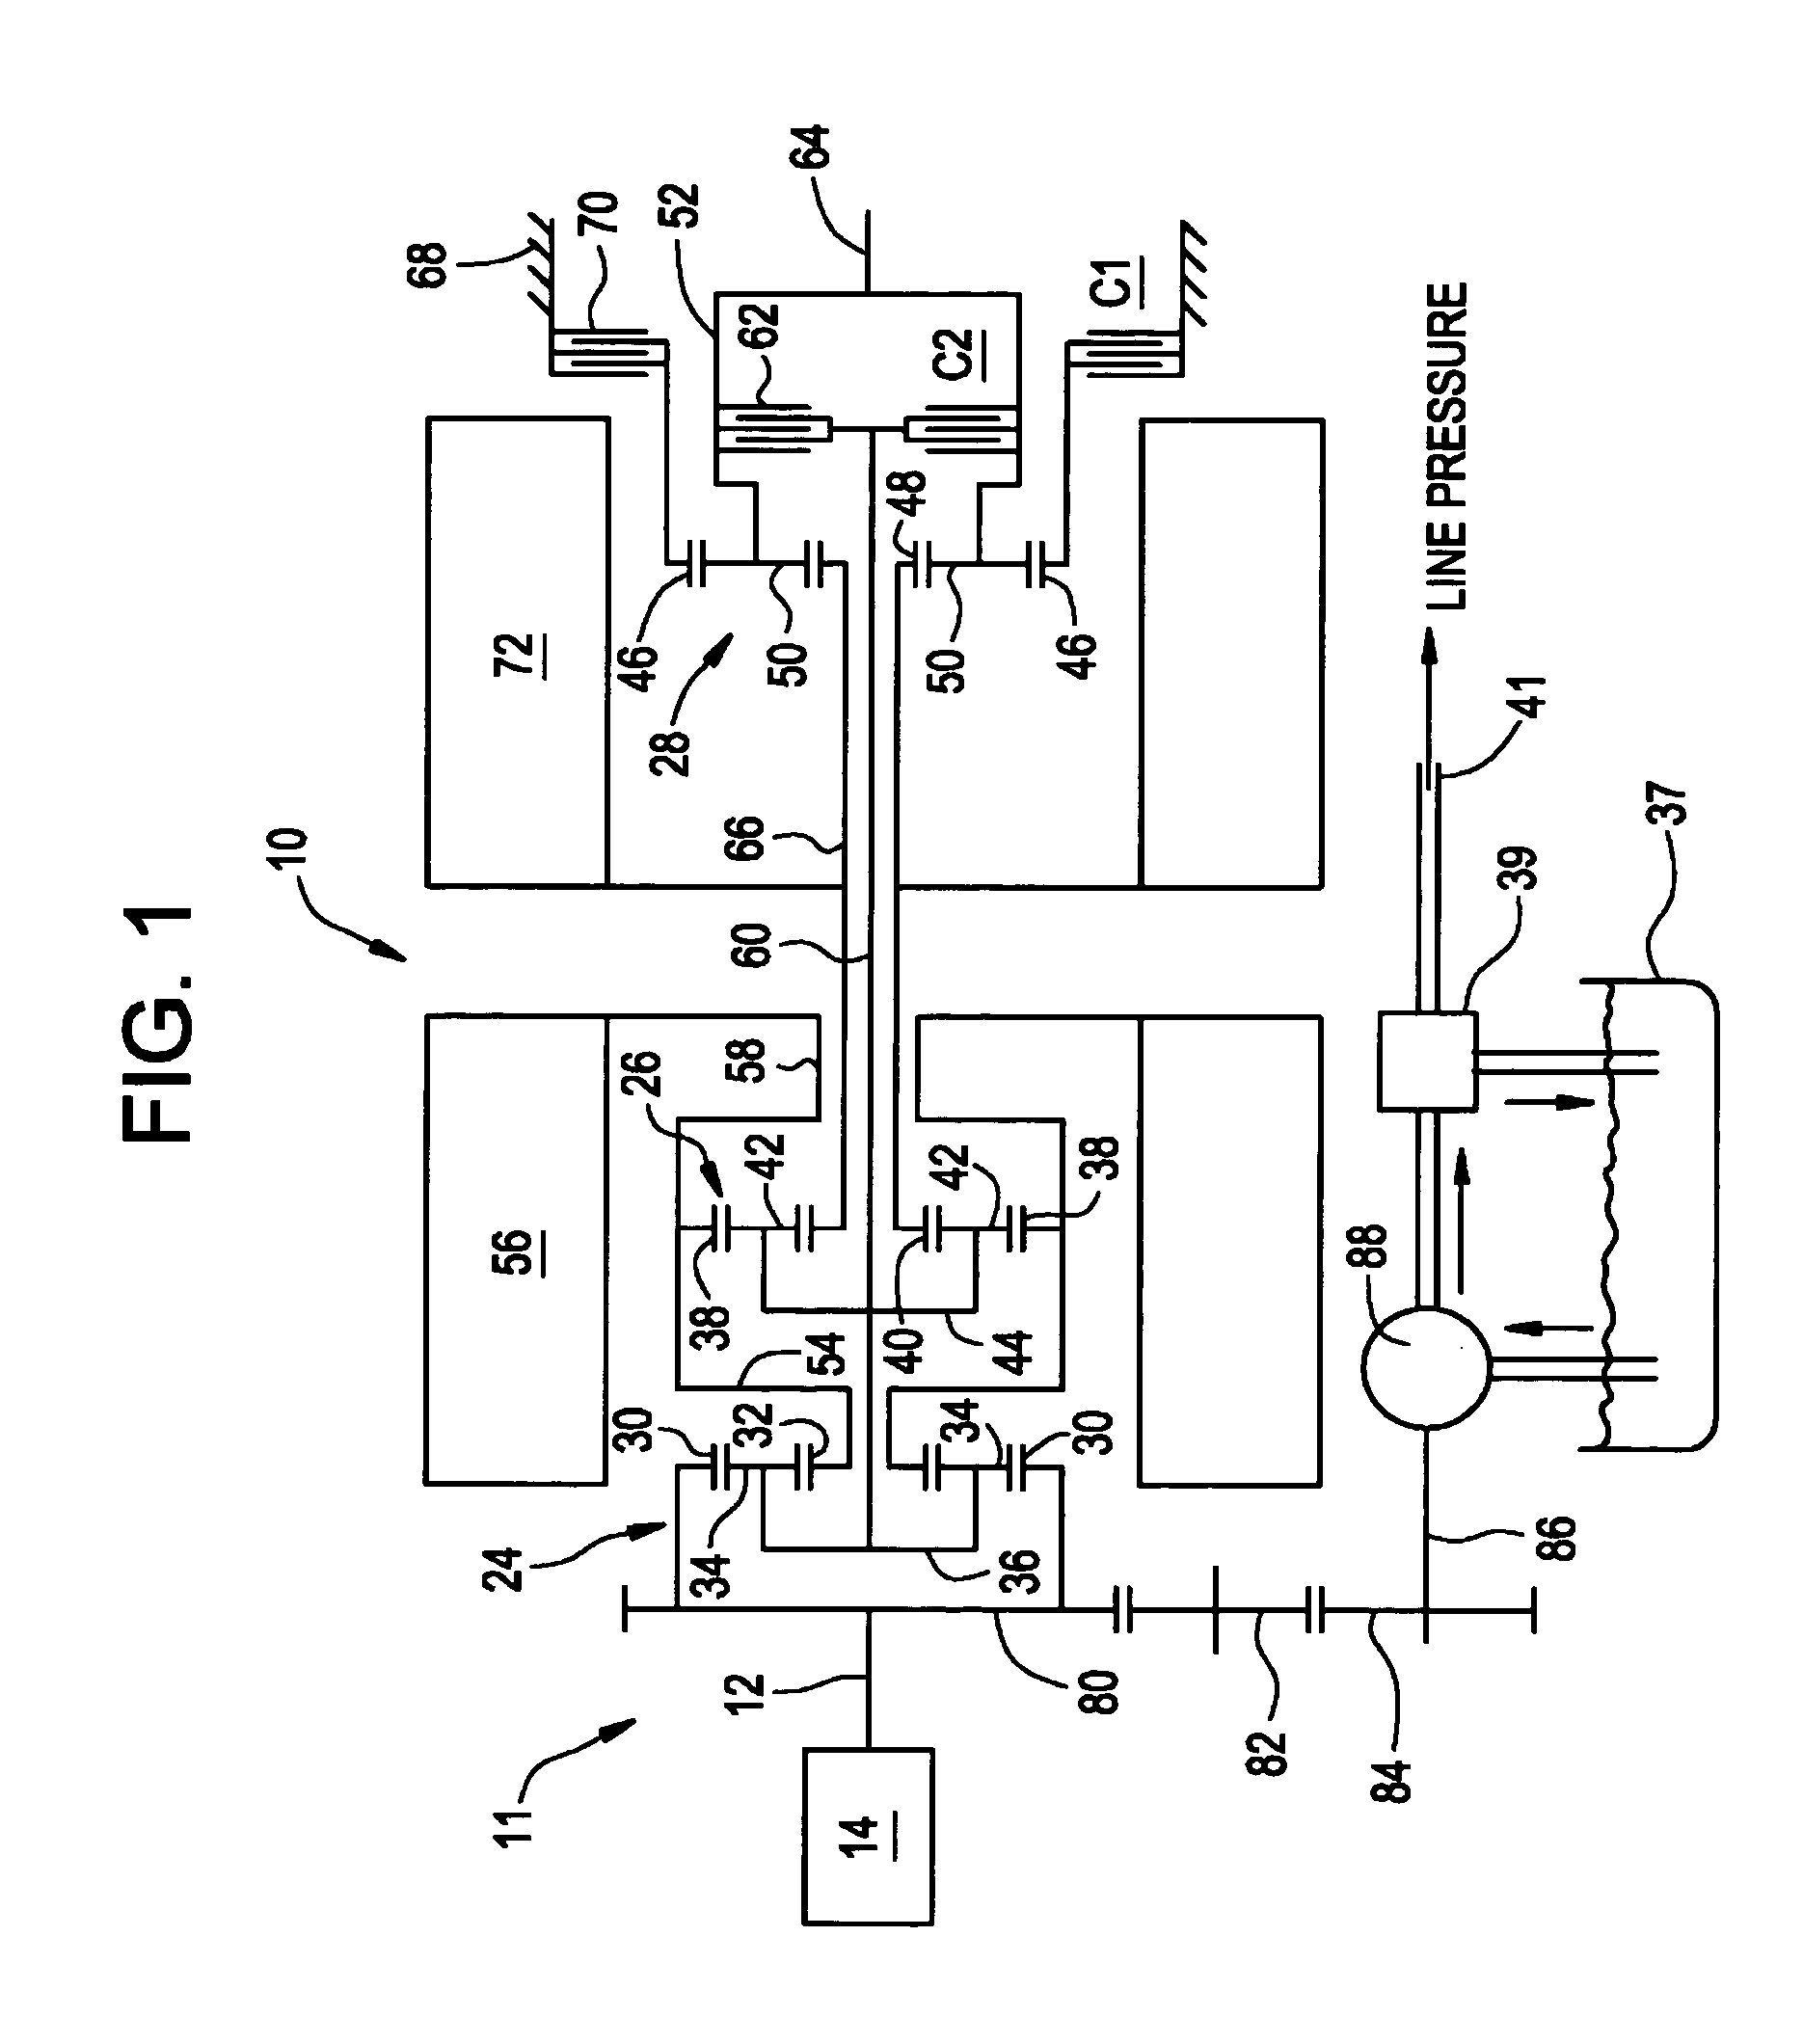 Energy storage system state of charge diagnostic